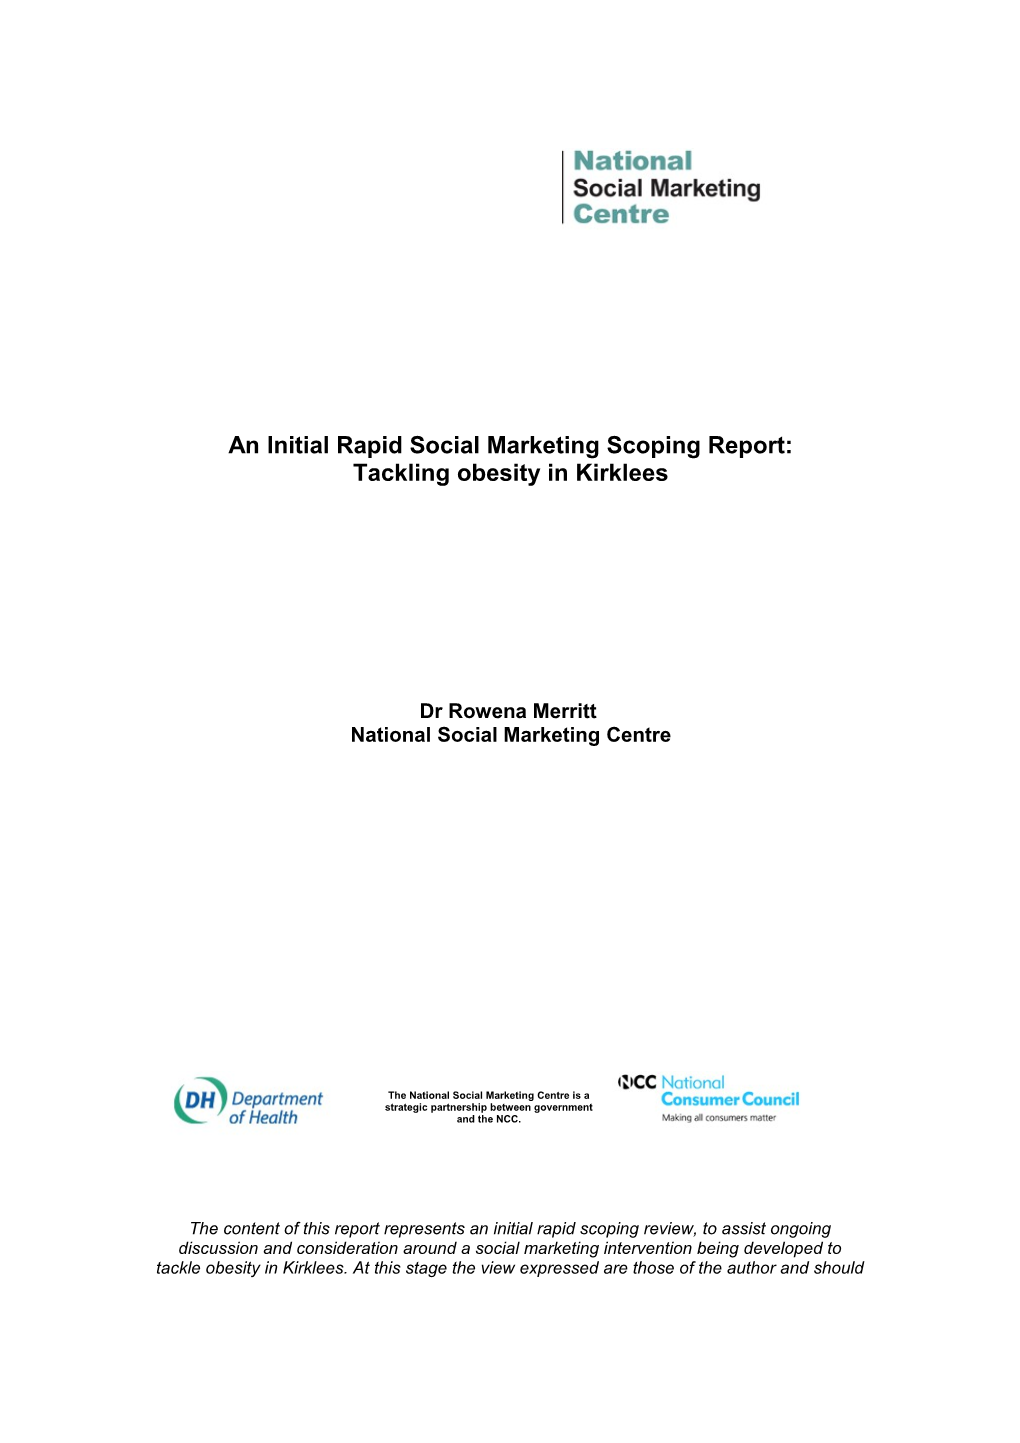 An Initial Rapid Social Marketing Scoping Report